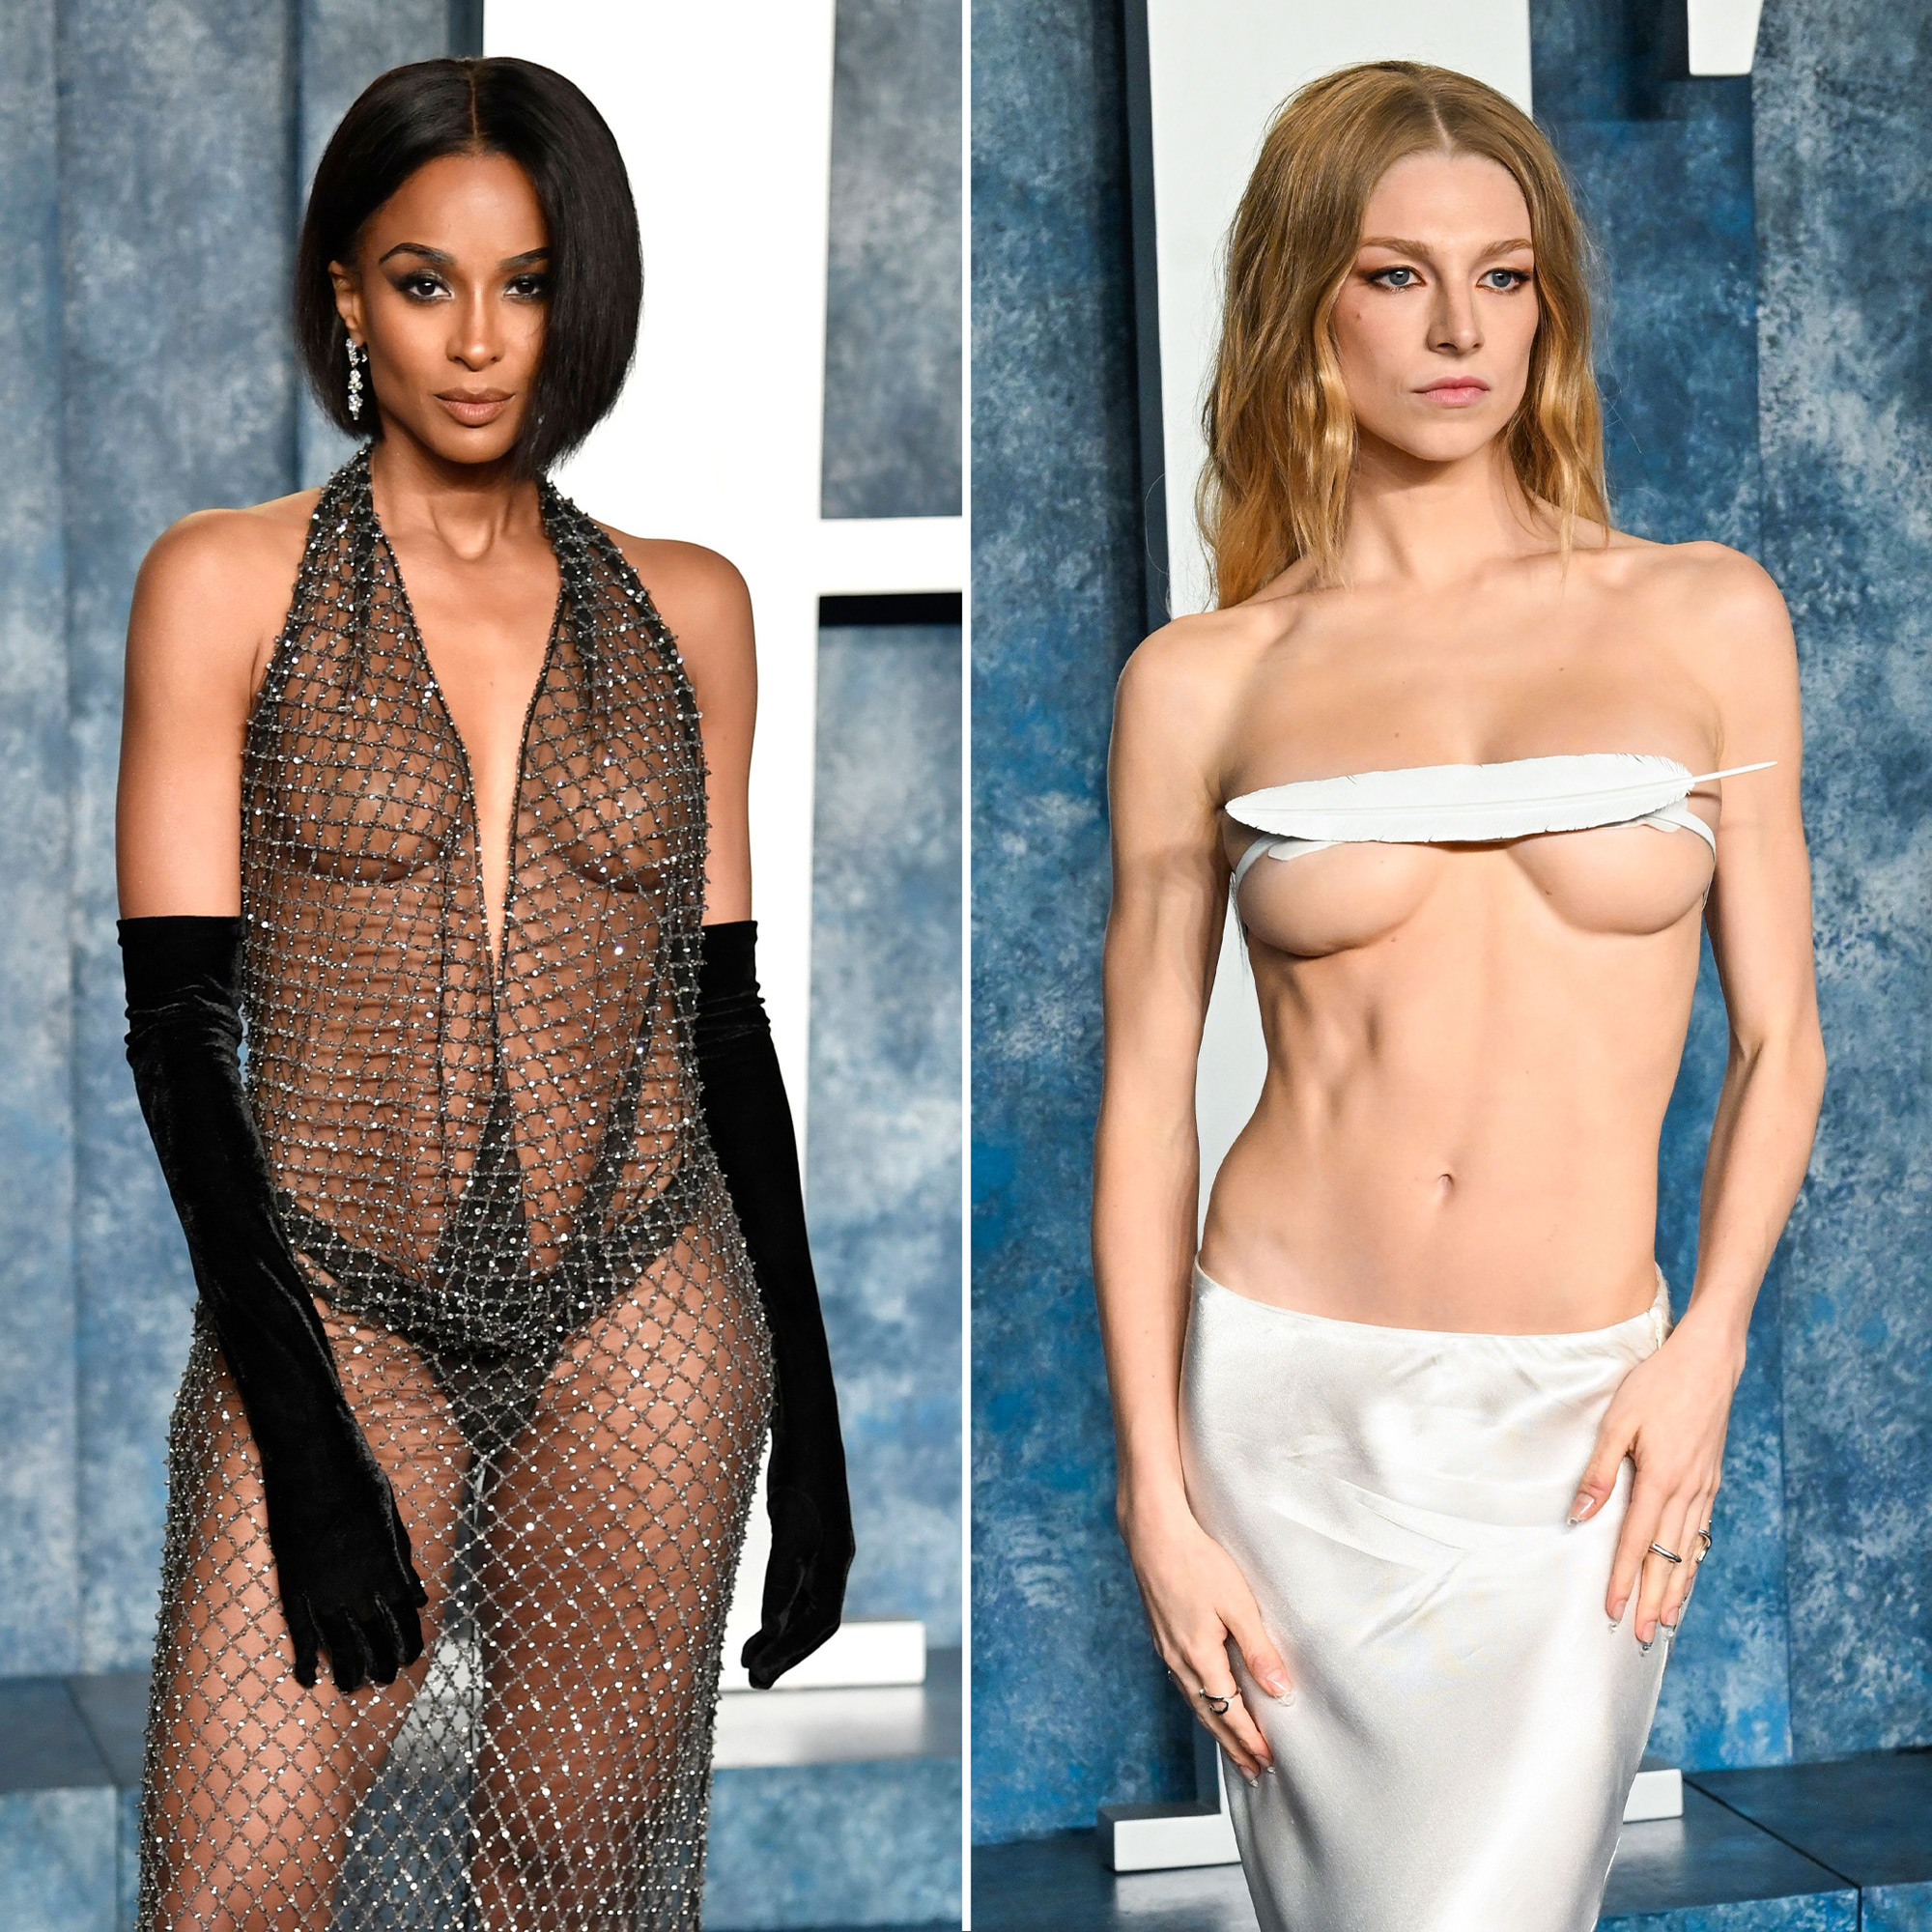 Classy Celeb Nudes - Celebs Boldest Nearly Naked Red Carpet Looks of All Time